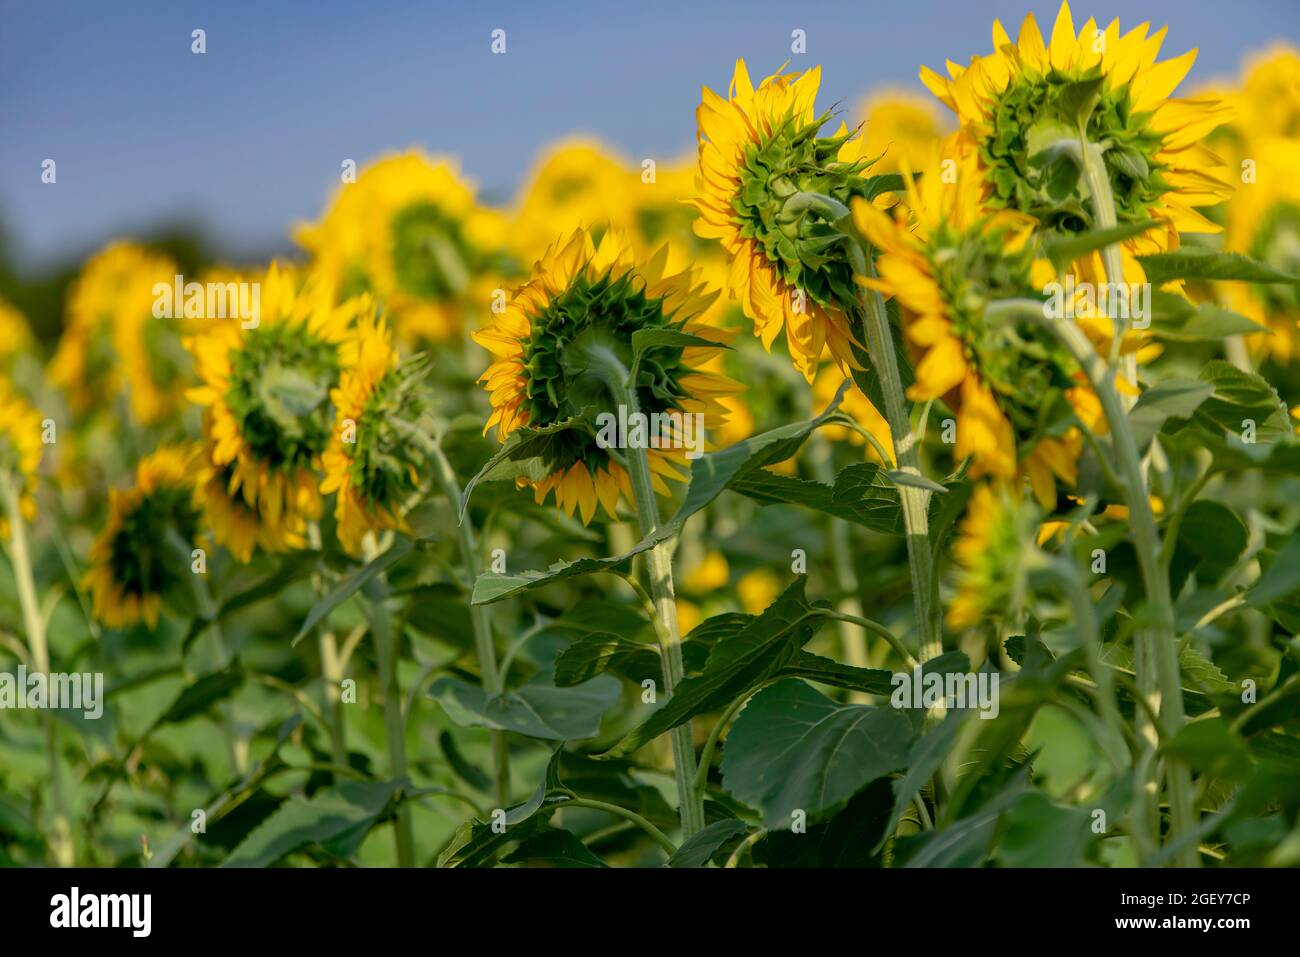 row of sunflowers facing the sun in one direction Stock Photo